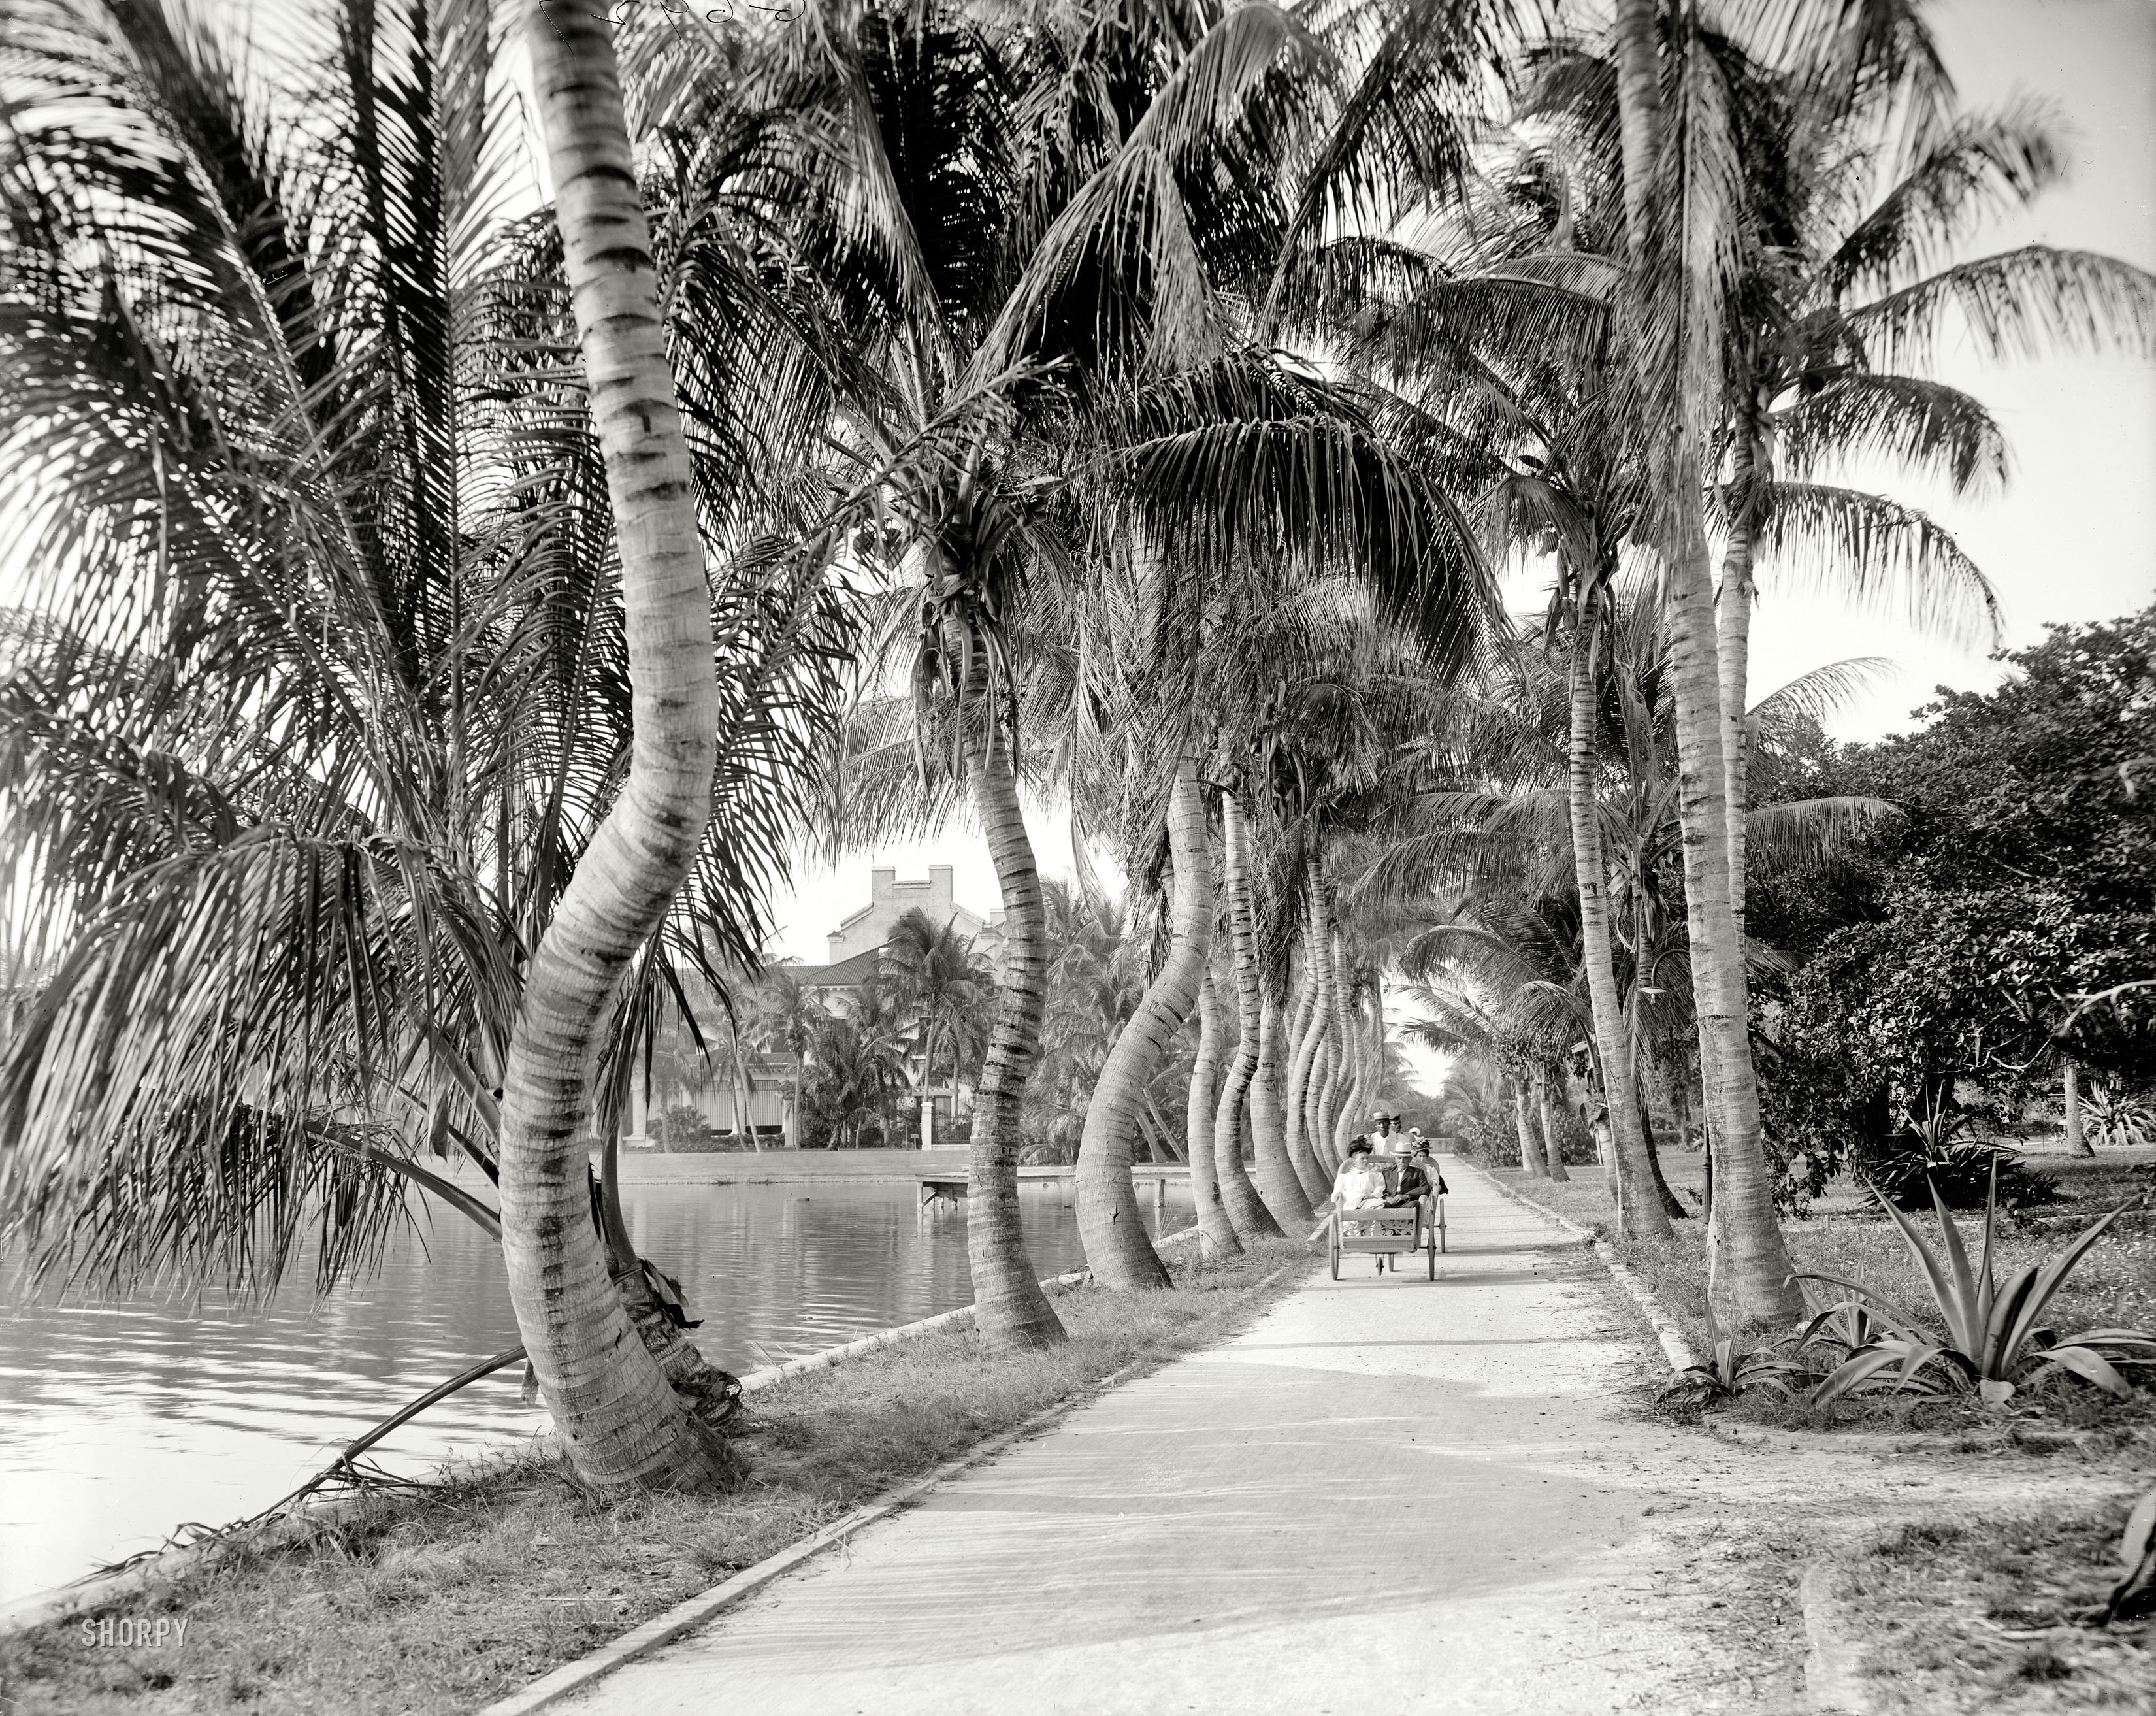 Palm Beach, Florida, circa 1908. "Along the shore of Lake Worth." 8x10 inch dry plate glass negative, Detroit Publishing Company. View full size.